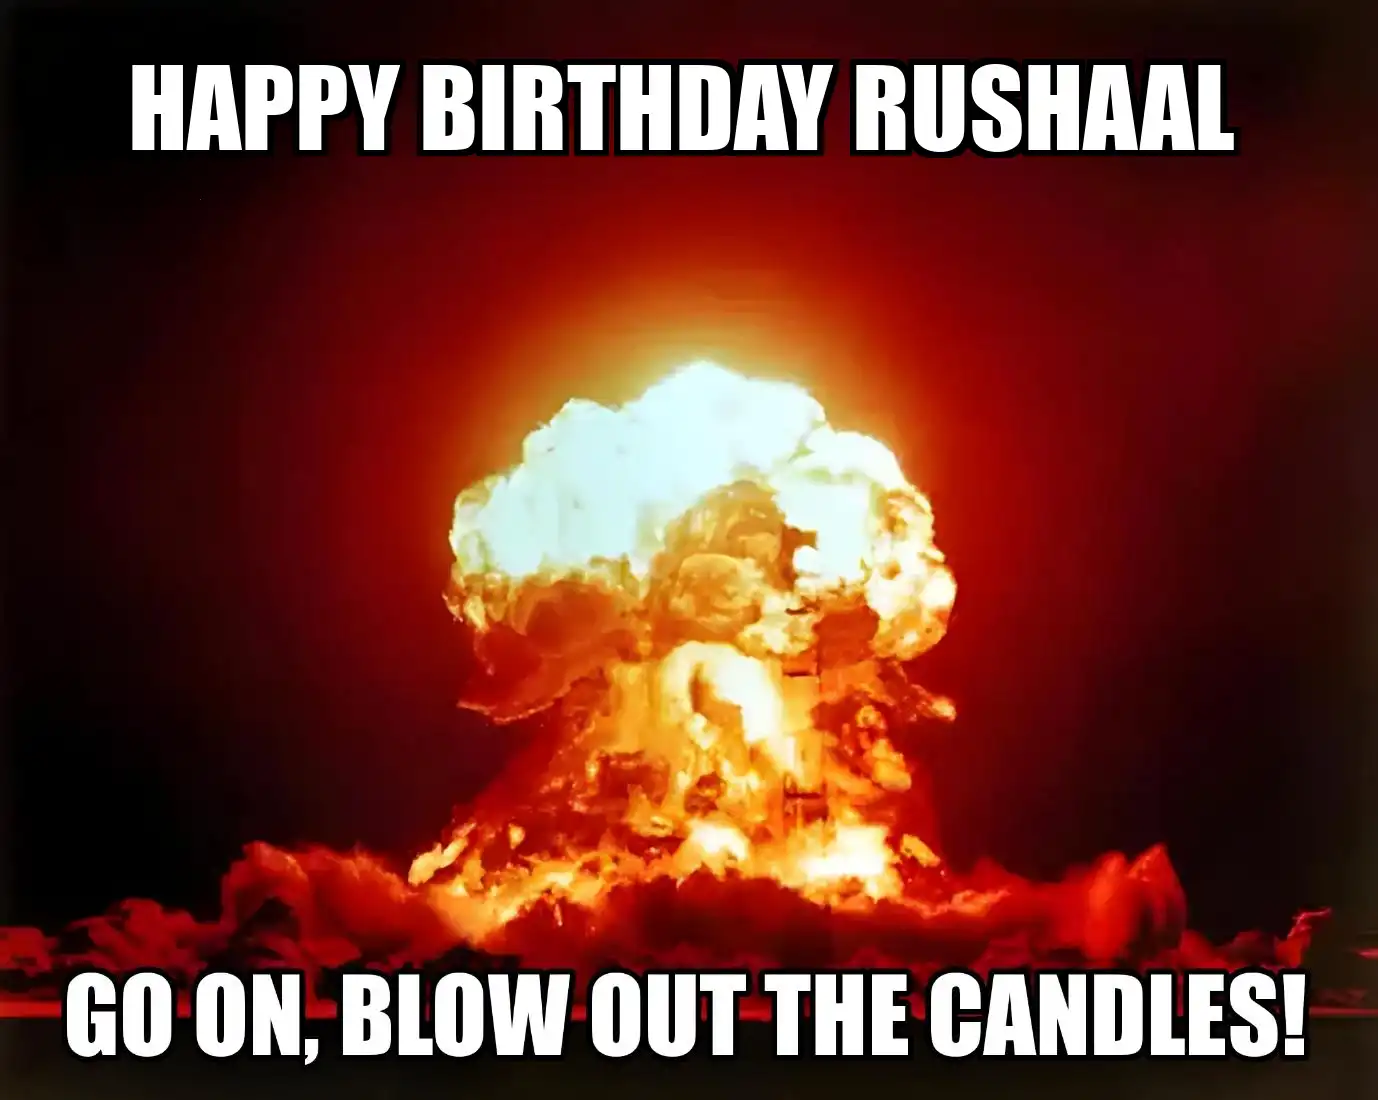 Happy Birthday Rushaal Go On Blow Out The Candles Meme